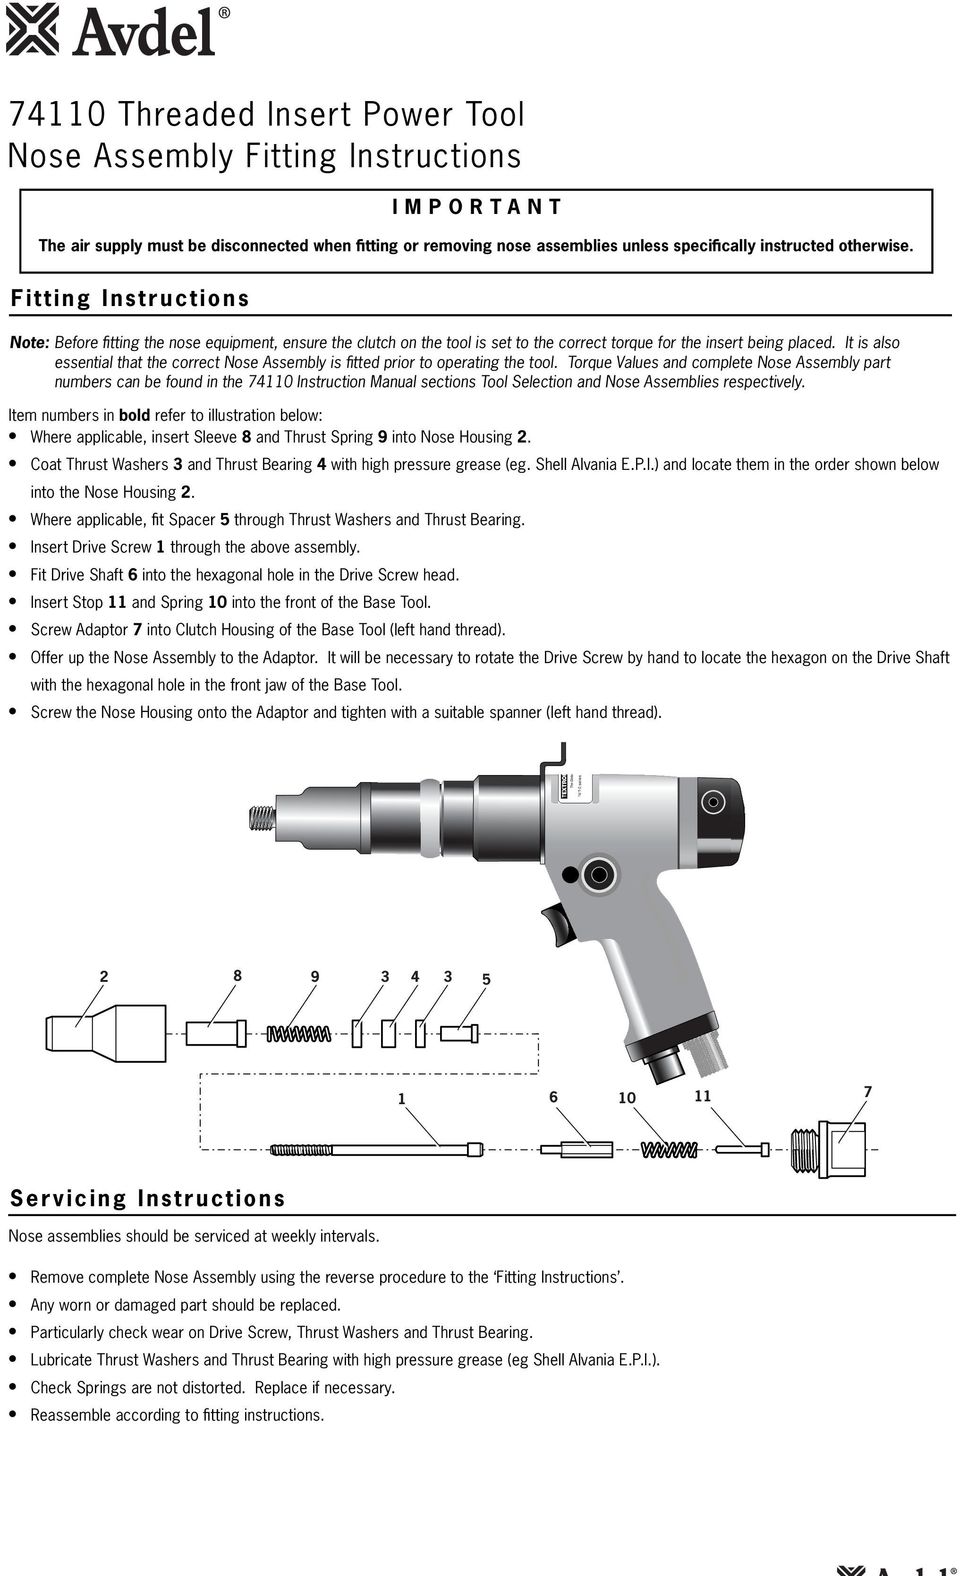 It is also essential that the correct Nose Assembly is fitted prior to operating the tool.